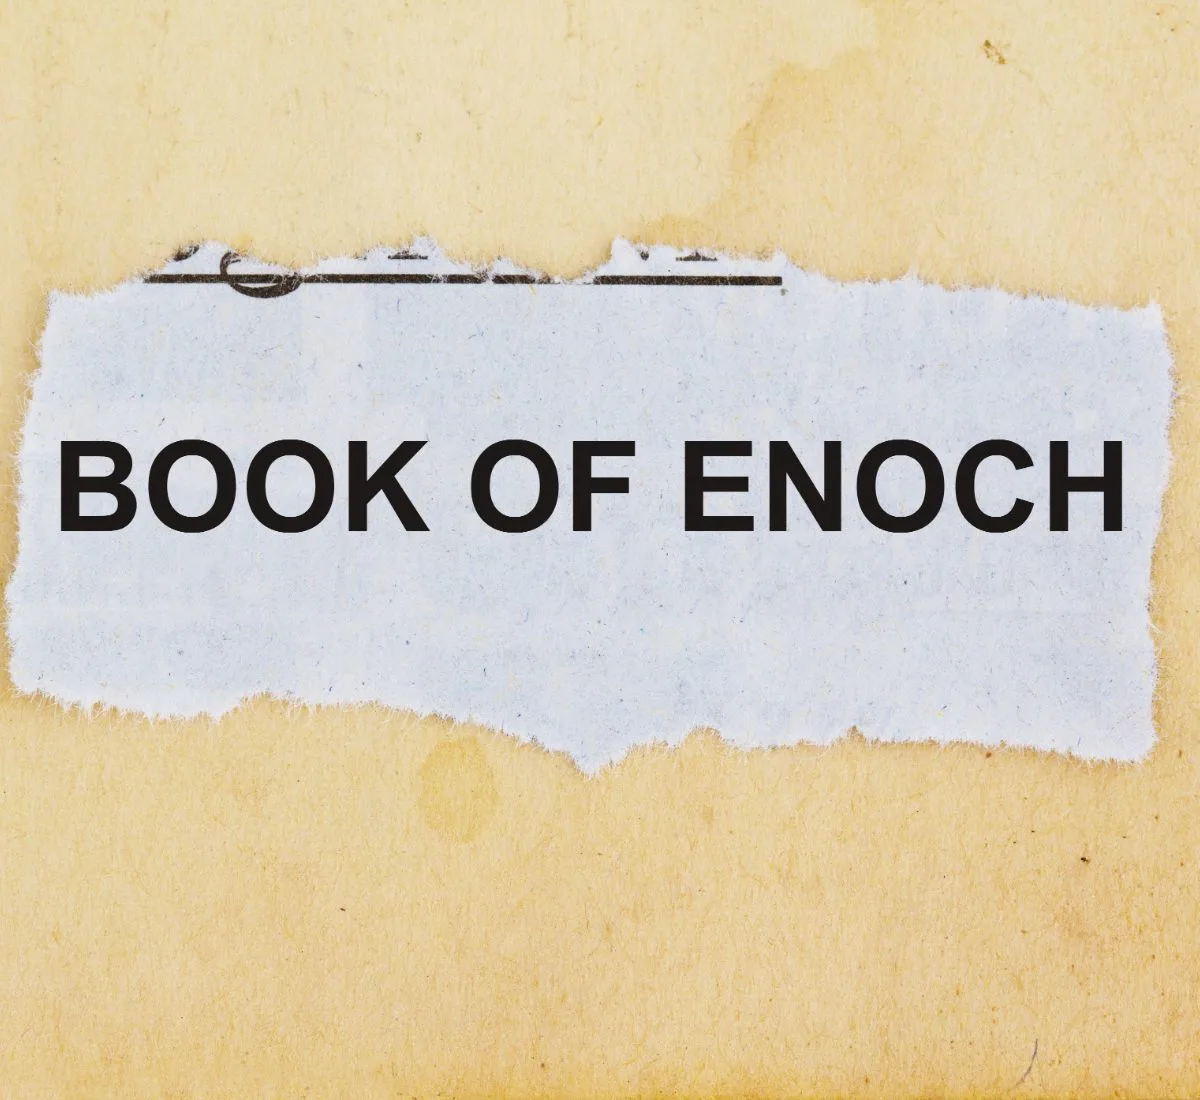 Why should I stay away from the Book of Enoch